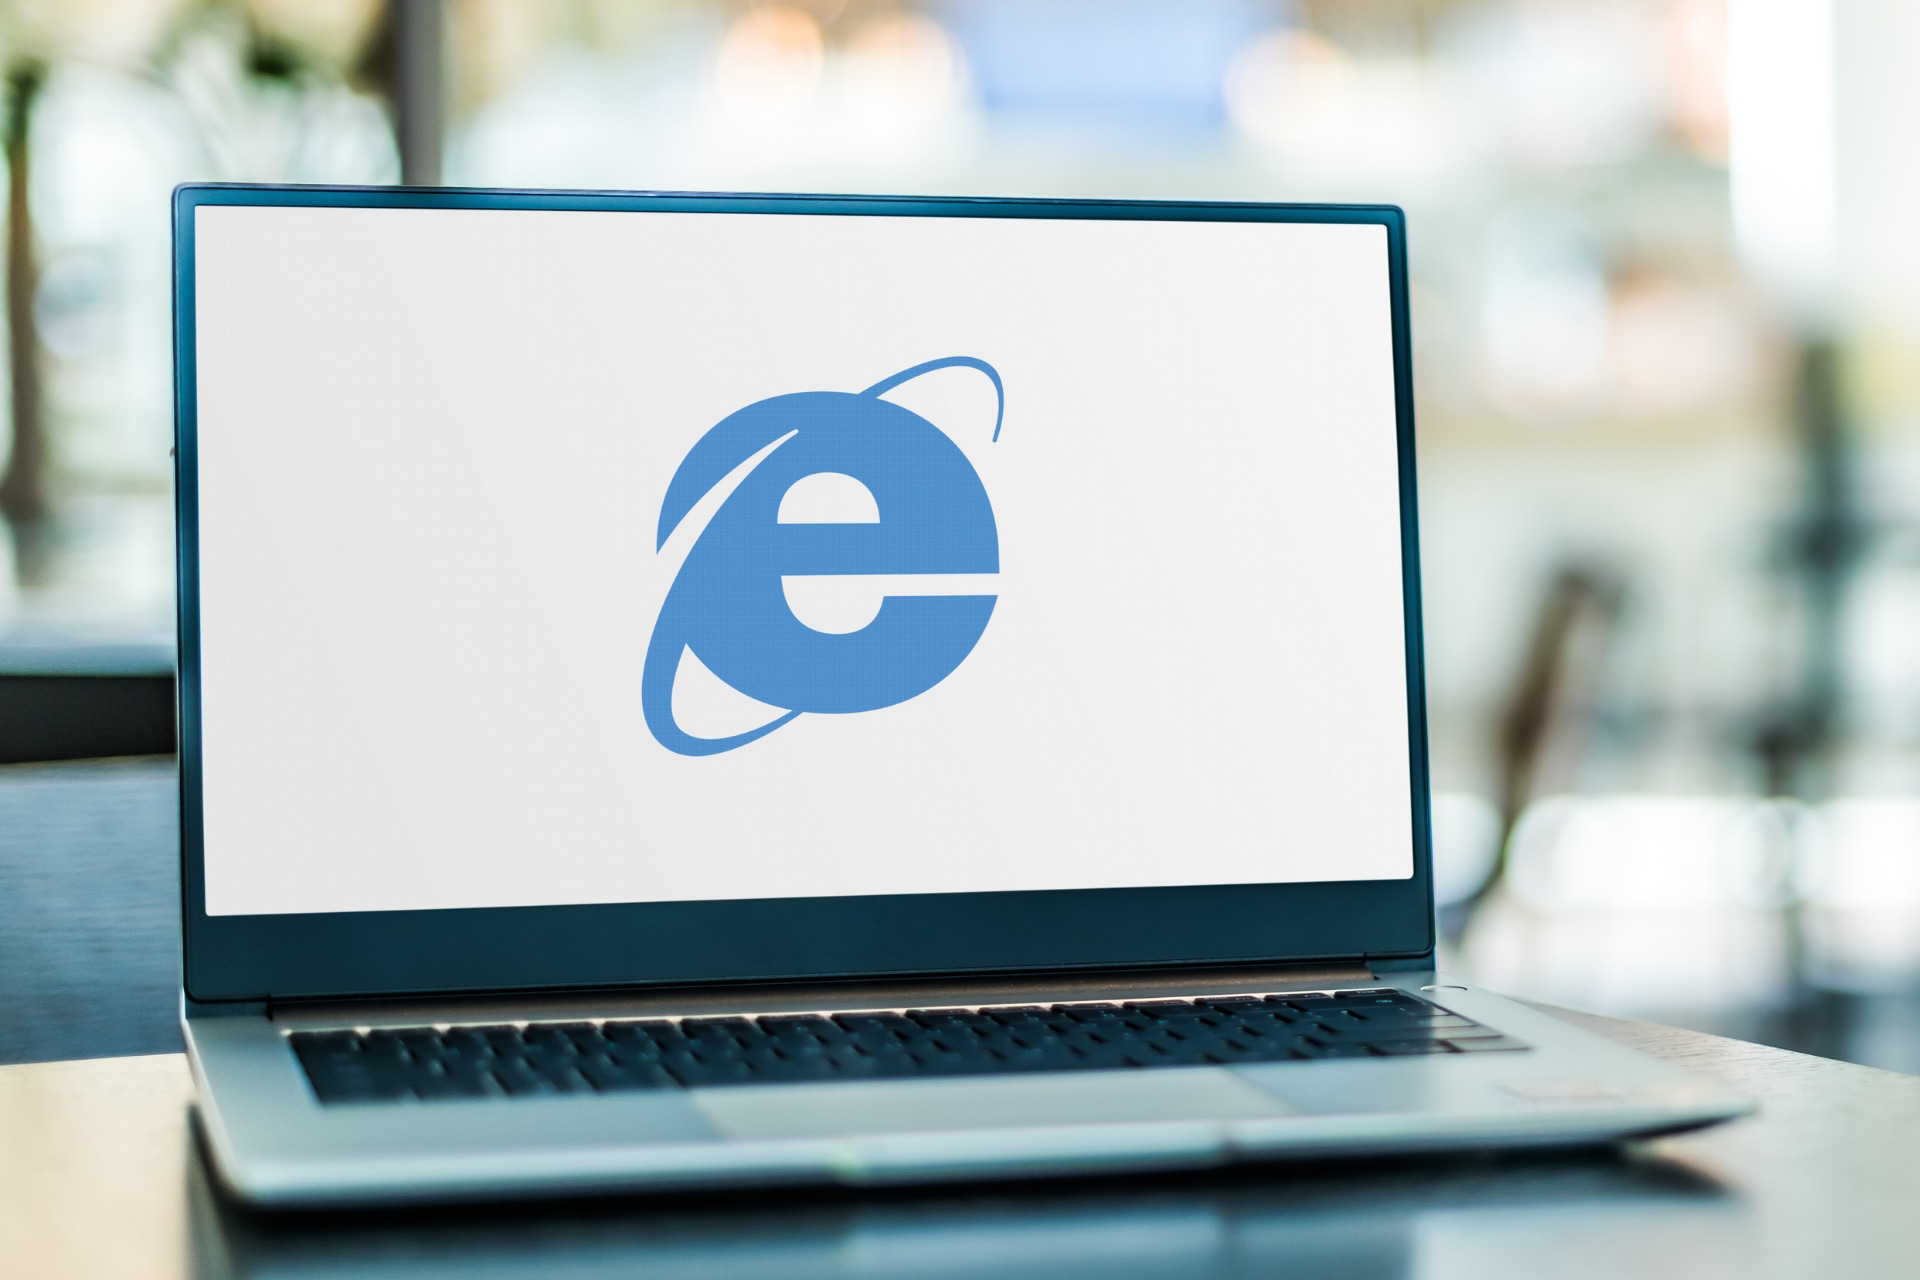 How to enable Internet Explorer on Windows 11?